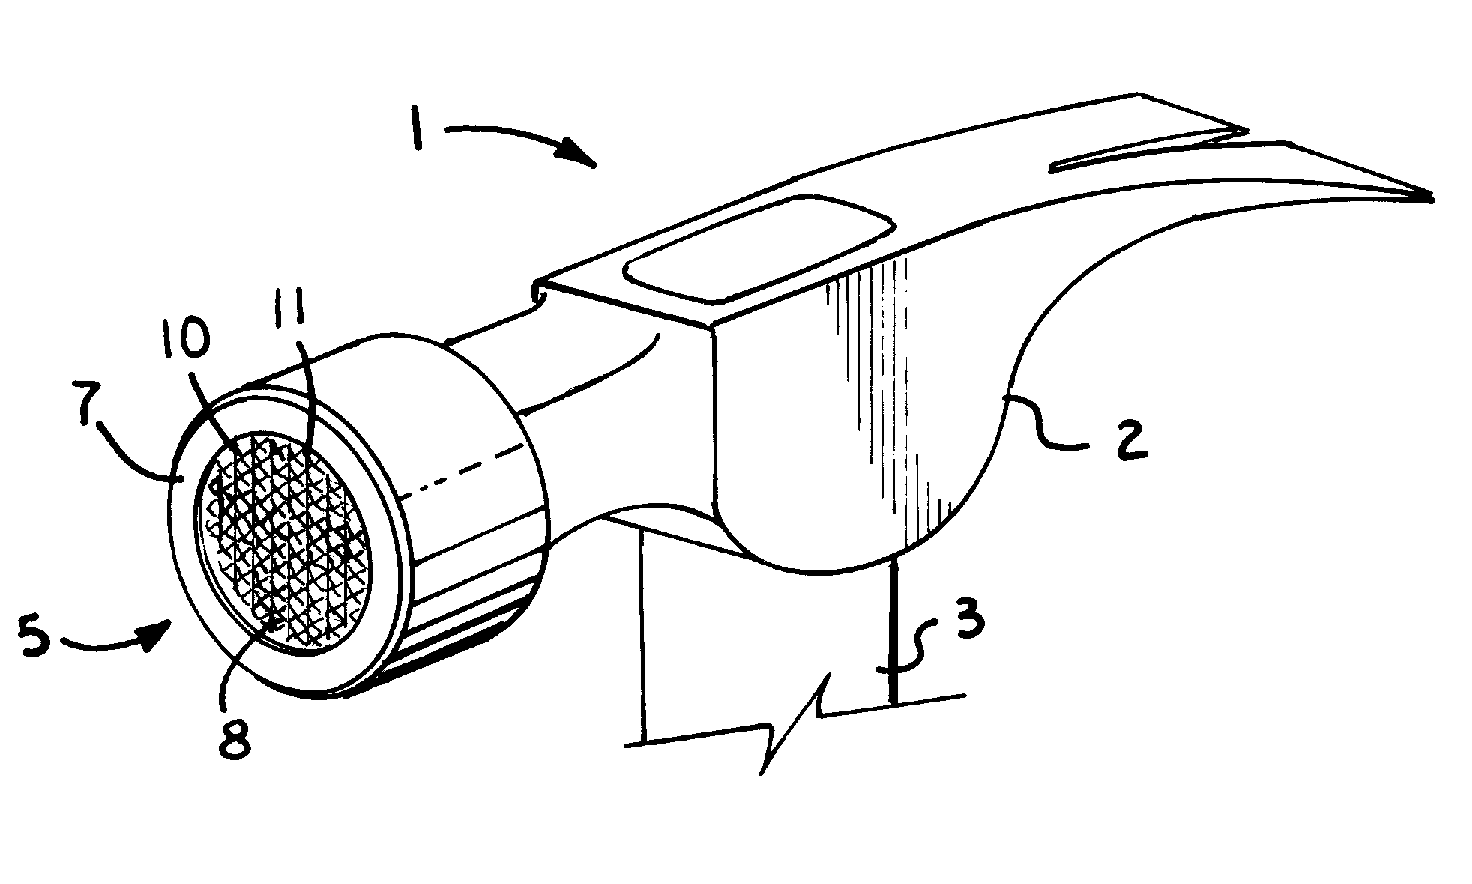 Hammer head with recessed traction striking surface